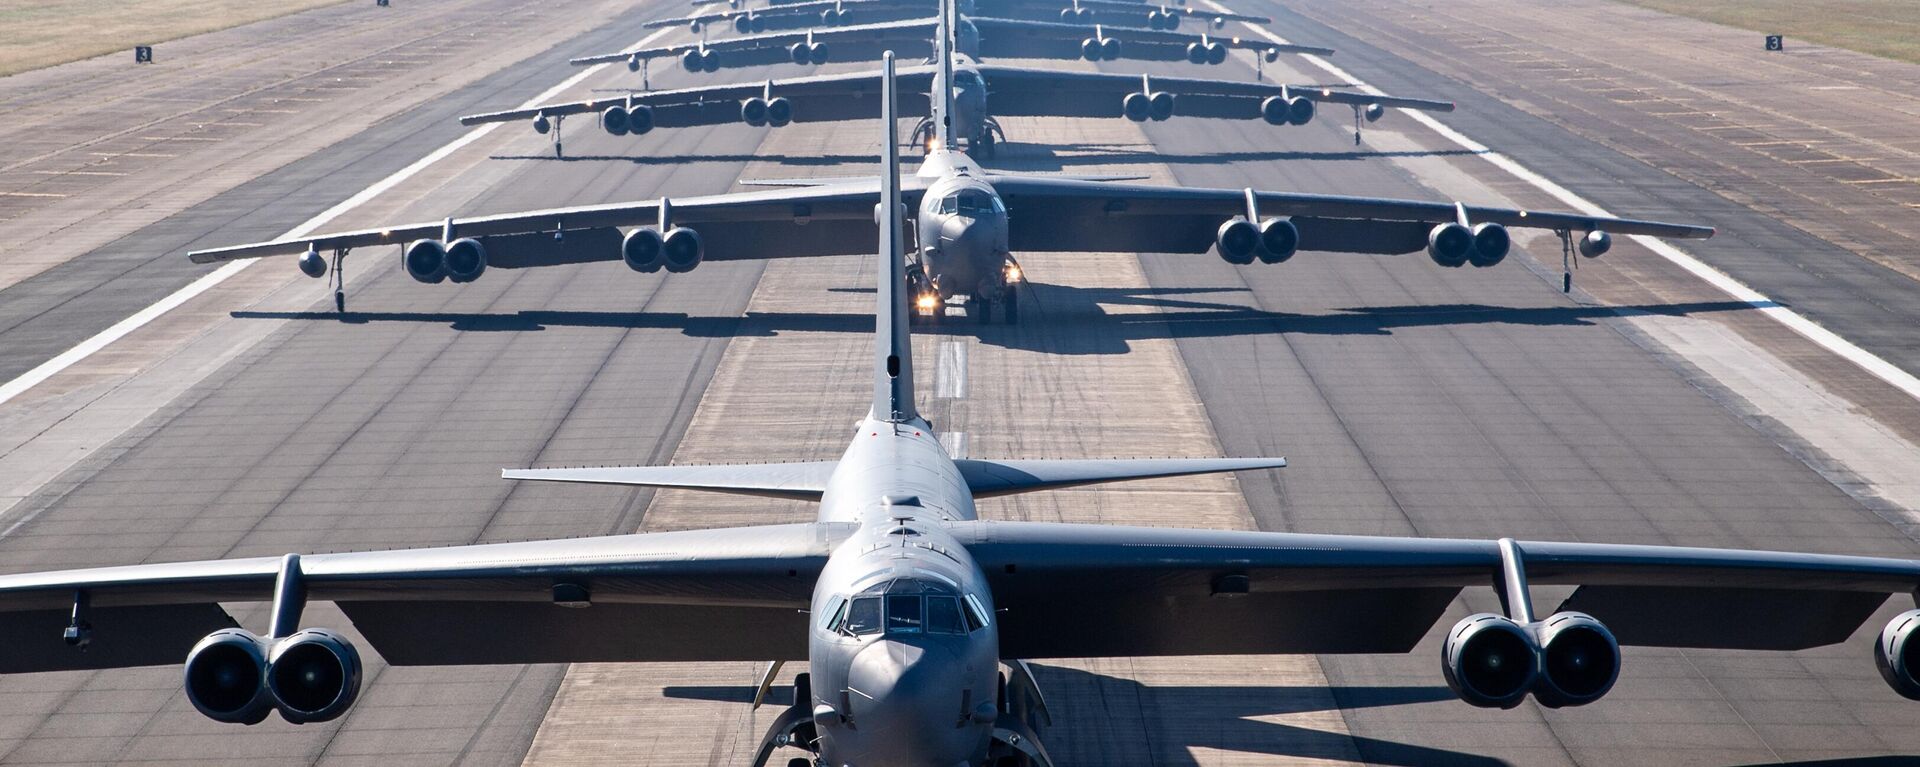 B-52H Stratofortresses from the 2nd Bomb Wing line up on the runway at Barksdale Air Force Base, La., Oct. 14, 2020. The B-52 is a long-range, heavy bomber that can perform a variety of missions and has been the backbone of U.S. strategic bomber forces for more than 60 years. - Sputnik International, 1920, 02.12.2022